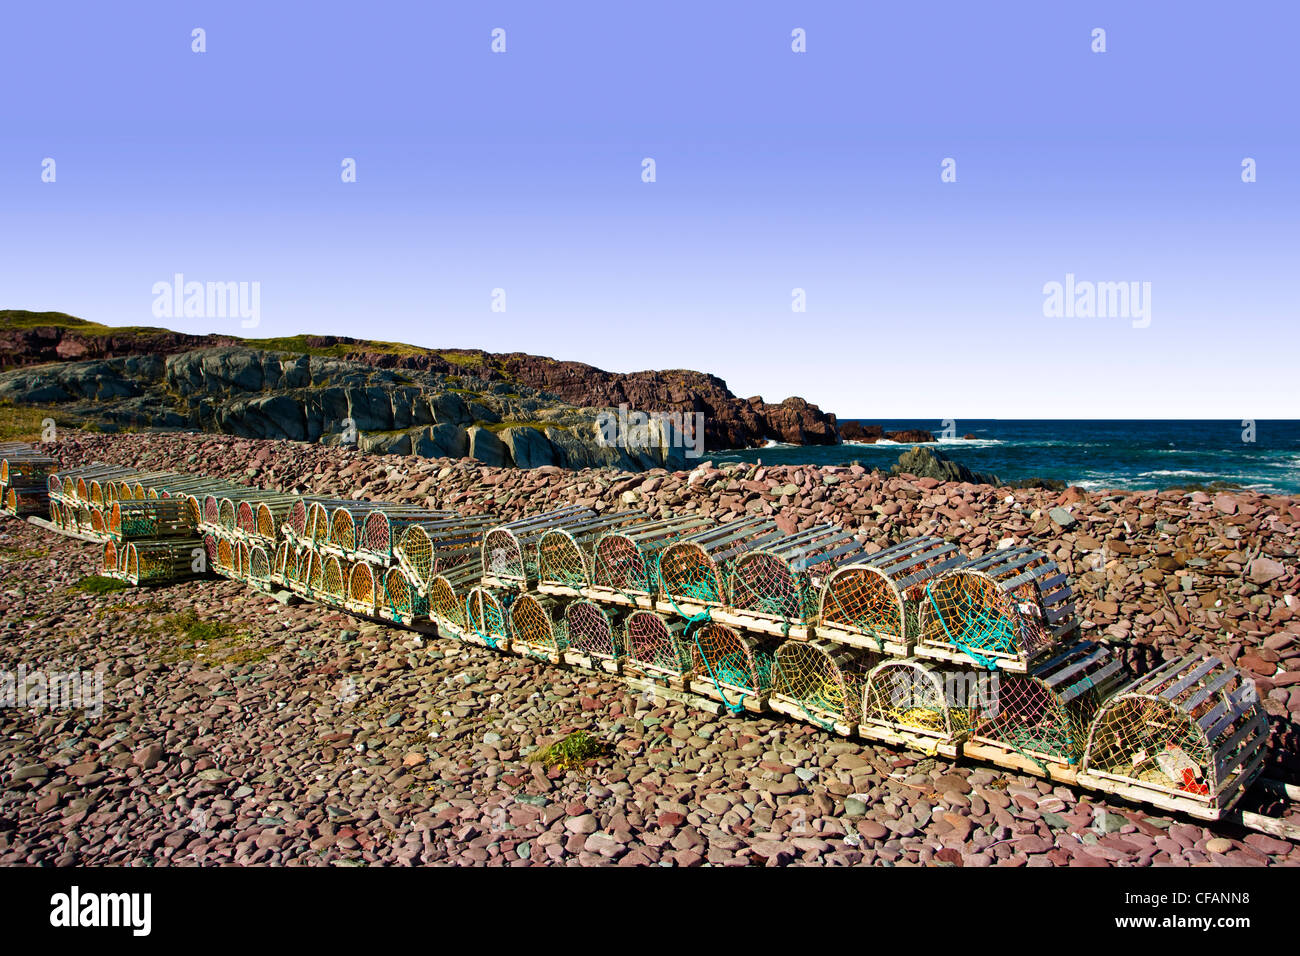 Lobster traps stacked and lined up on beach at Tickle Cove, Newfoundland and Labrador, Canada. Stock Photo